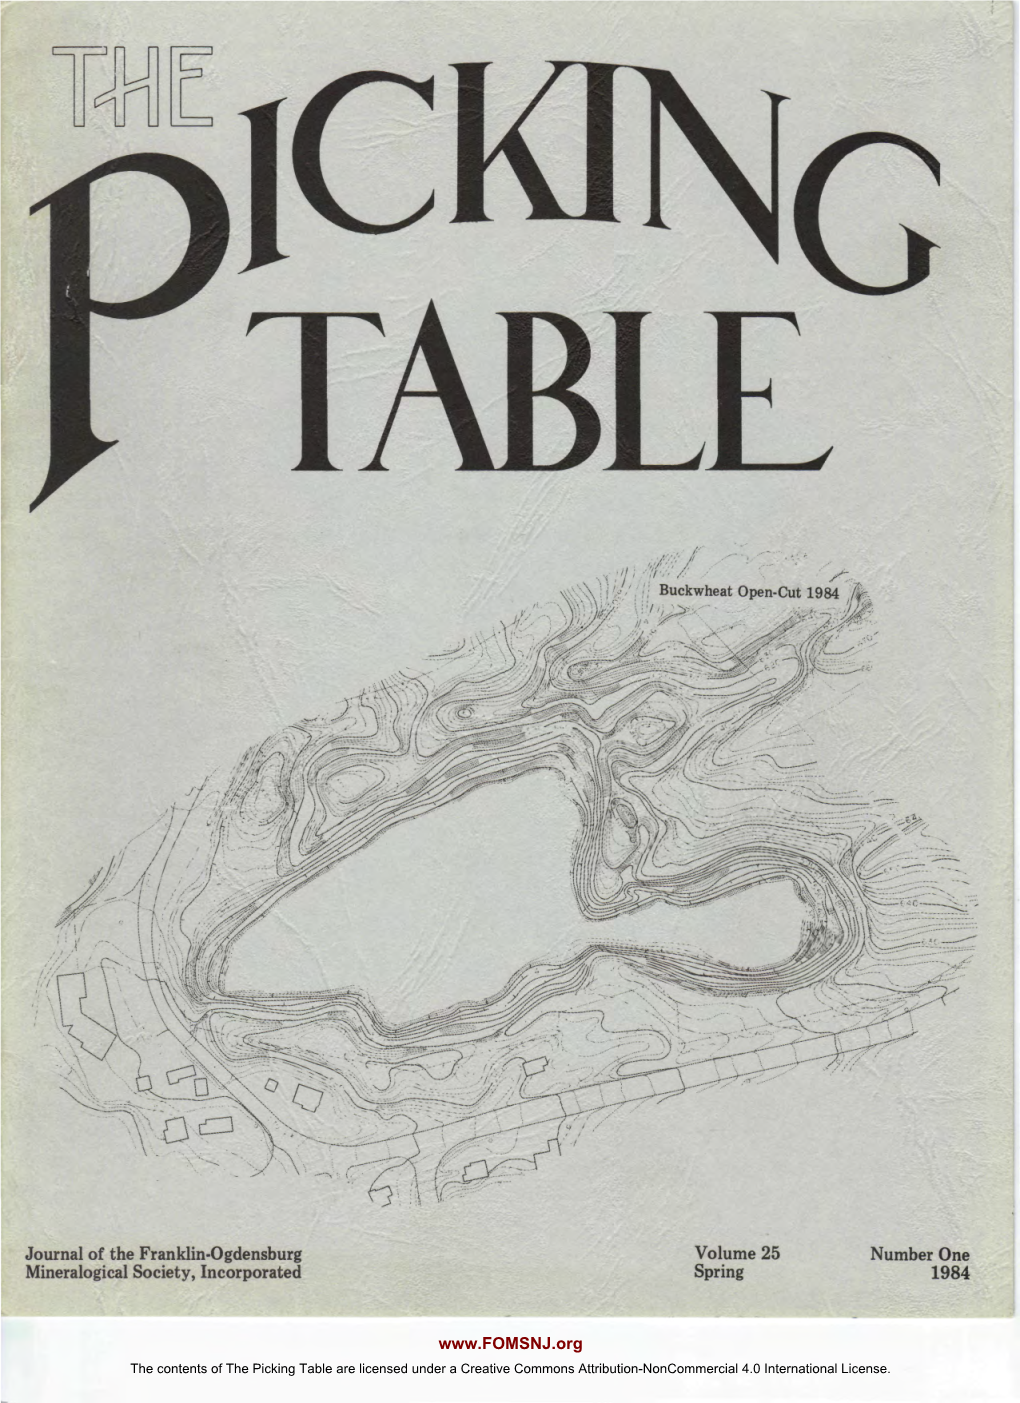 The Picking Table Volume 25, No. 1 – Spring 1984